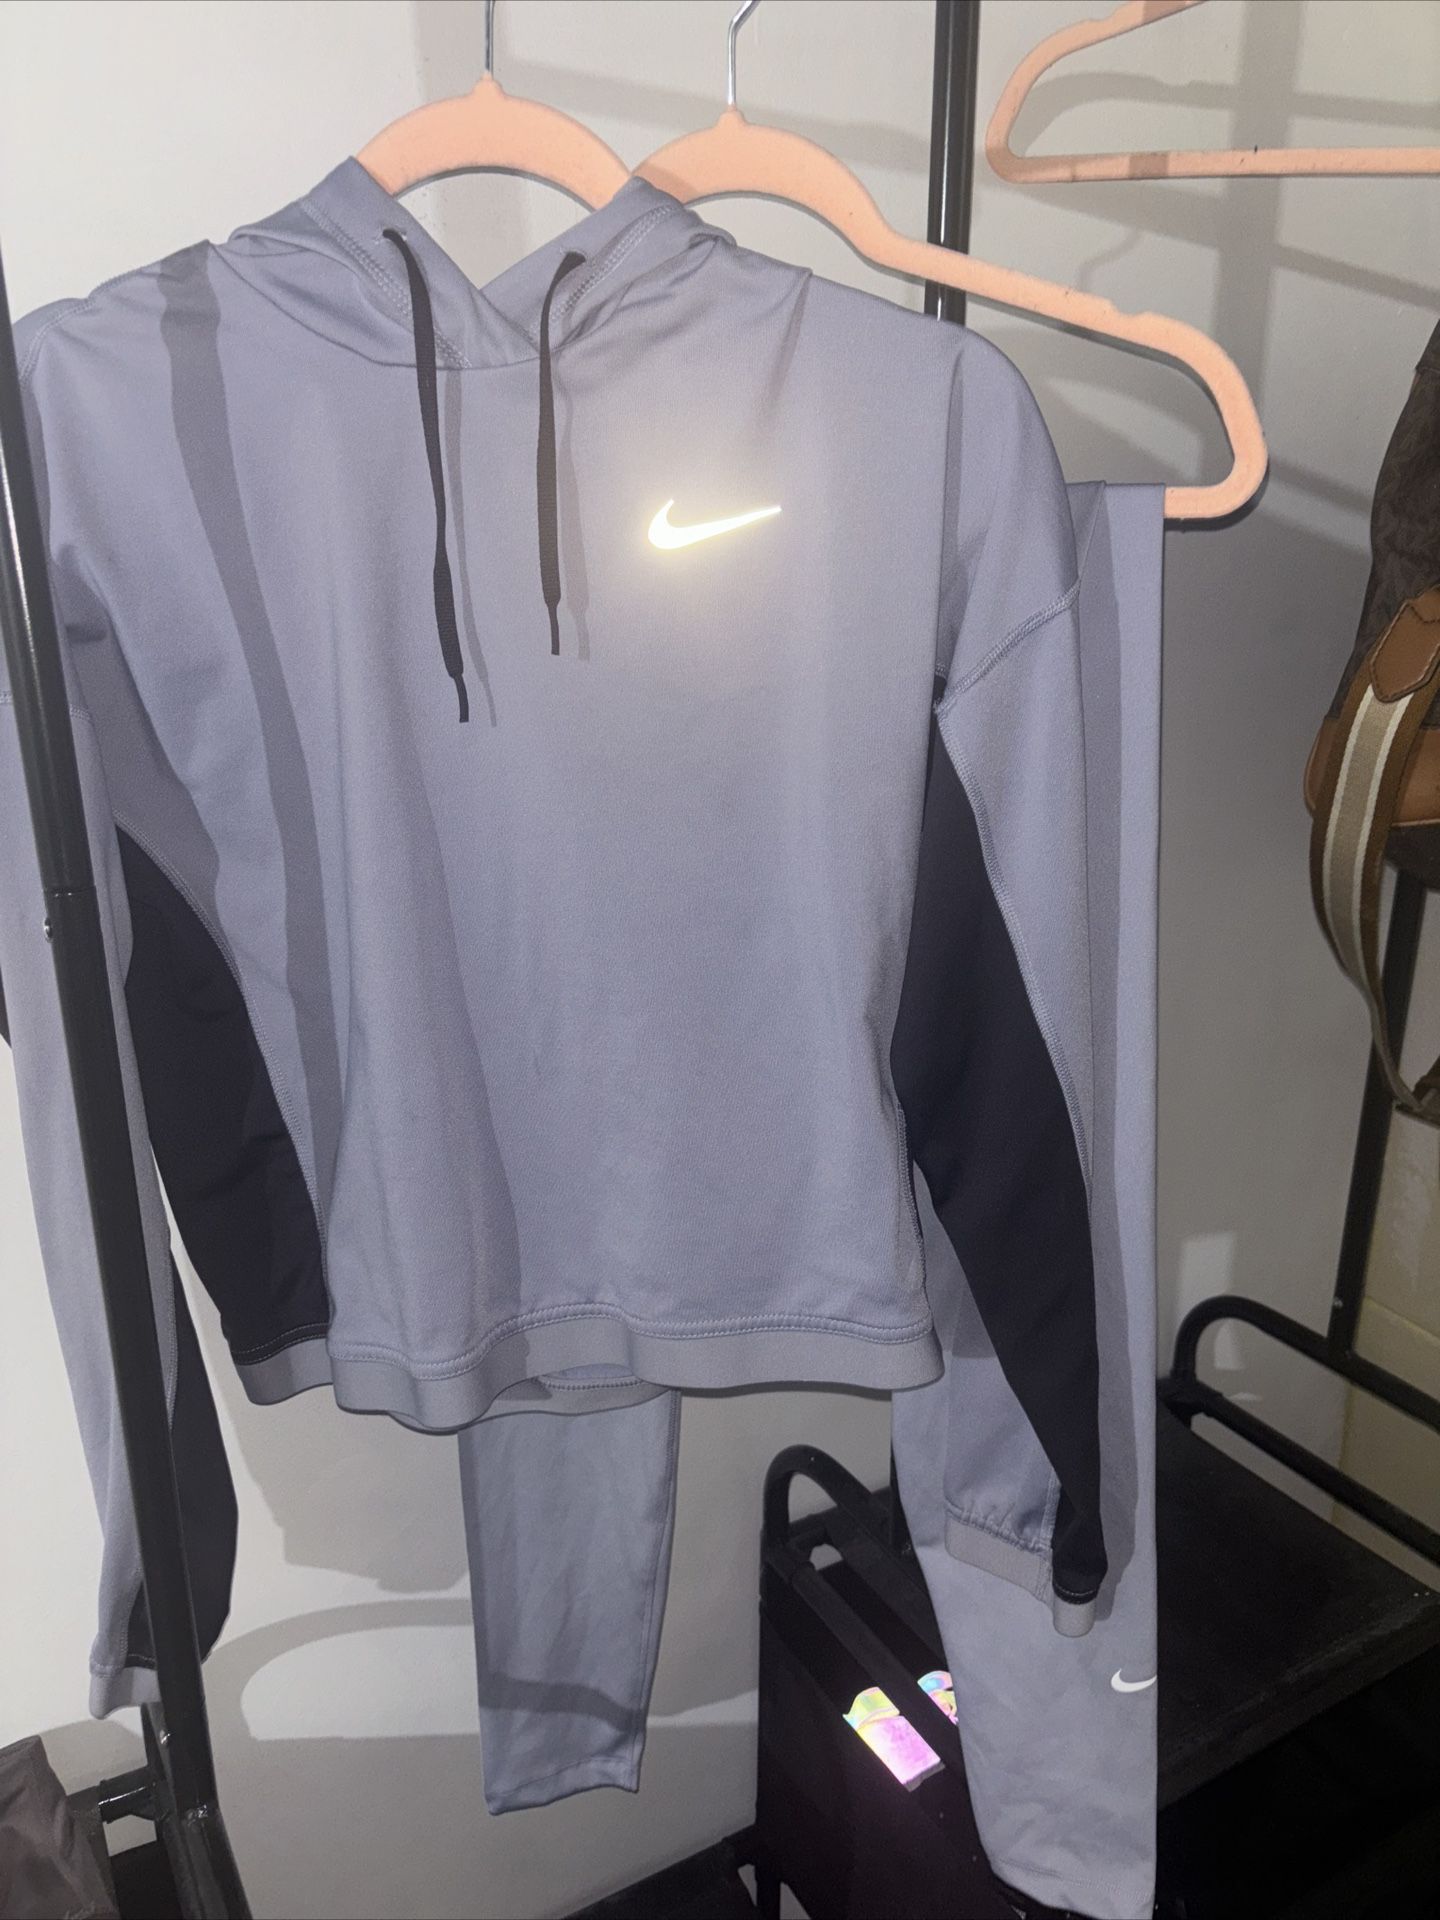 NIKE Purple Women’s Dry Fit Running Outfit